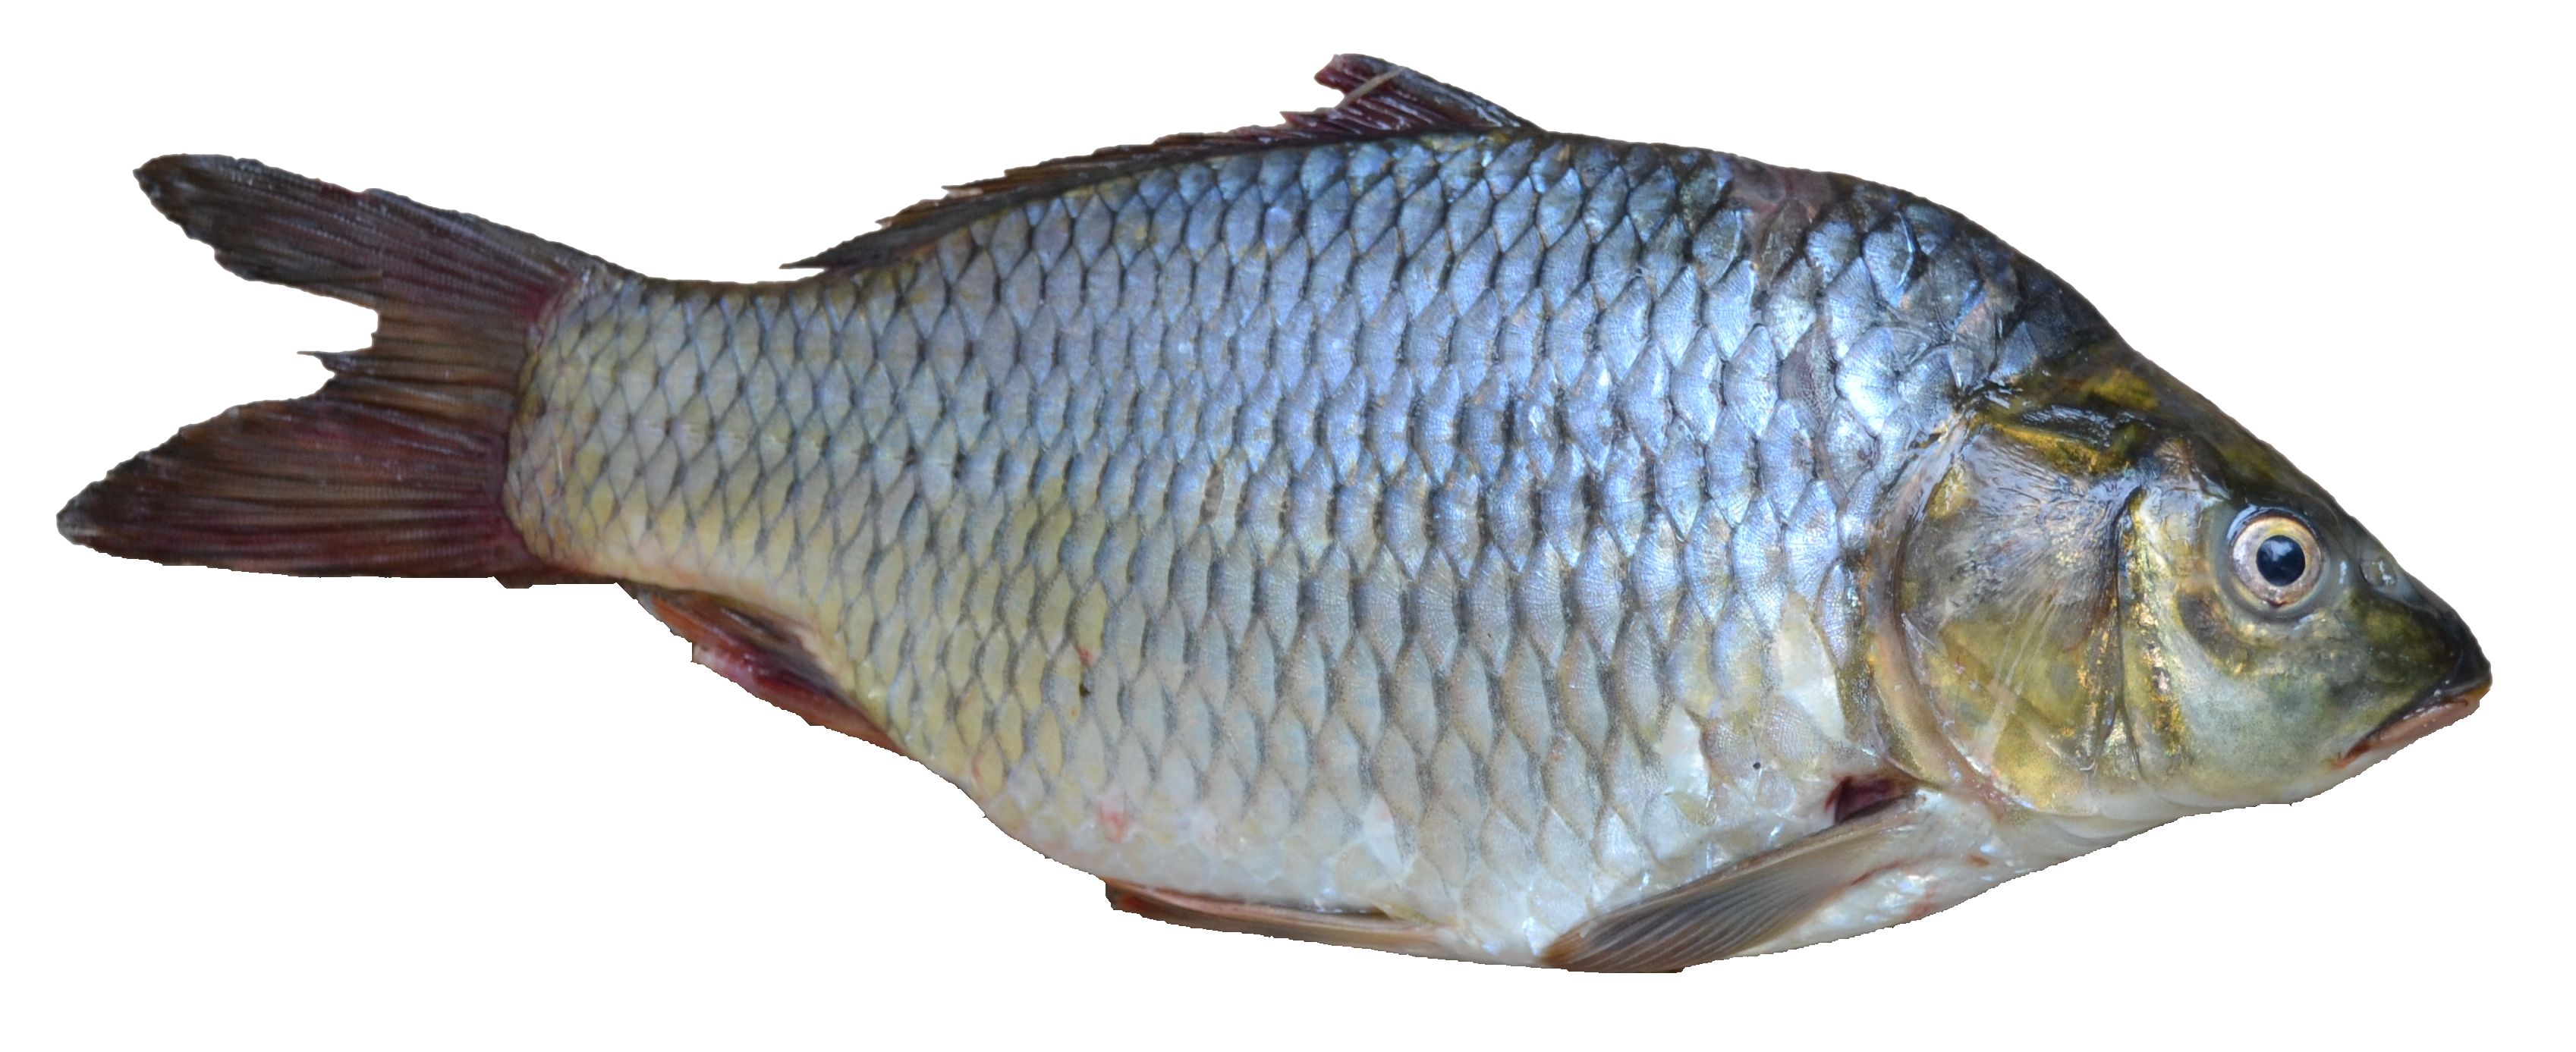 Download Free High Quality Fish Images Png Transparent Background Free Download 26347 Freeiconspng